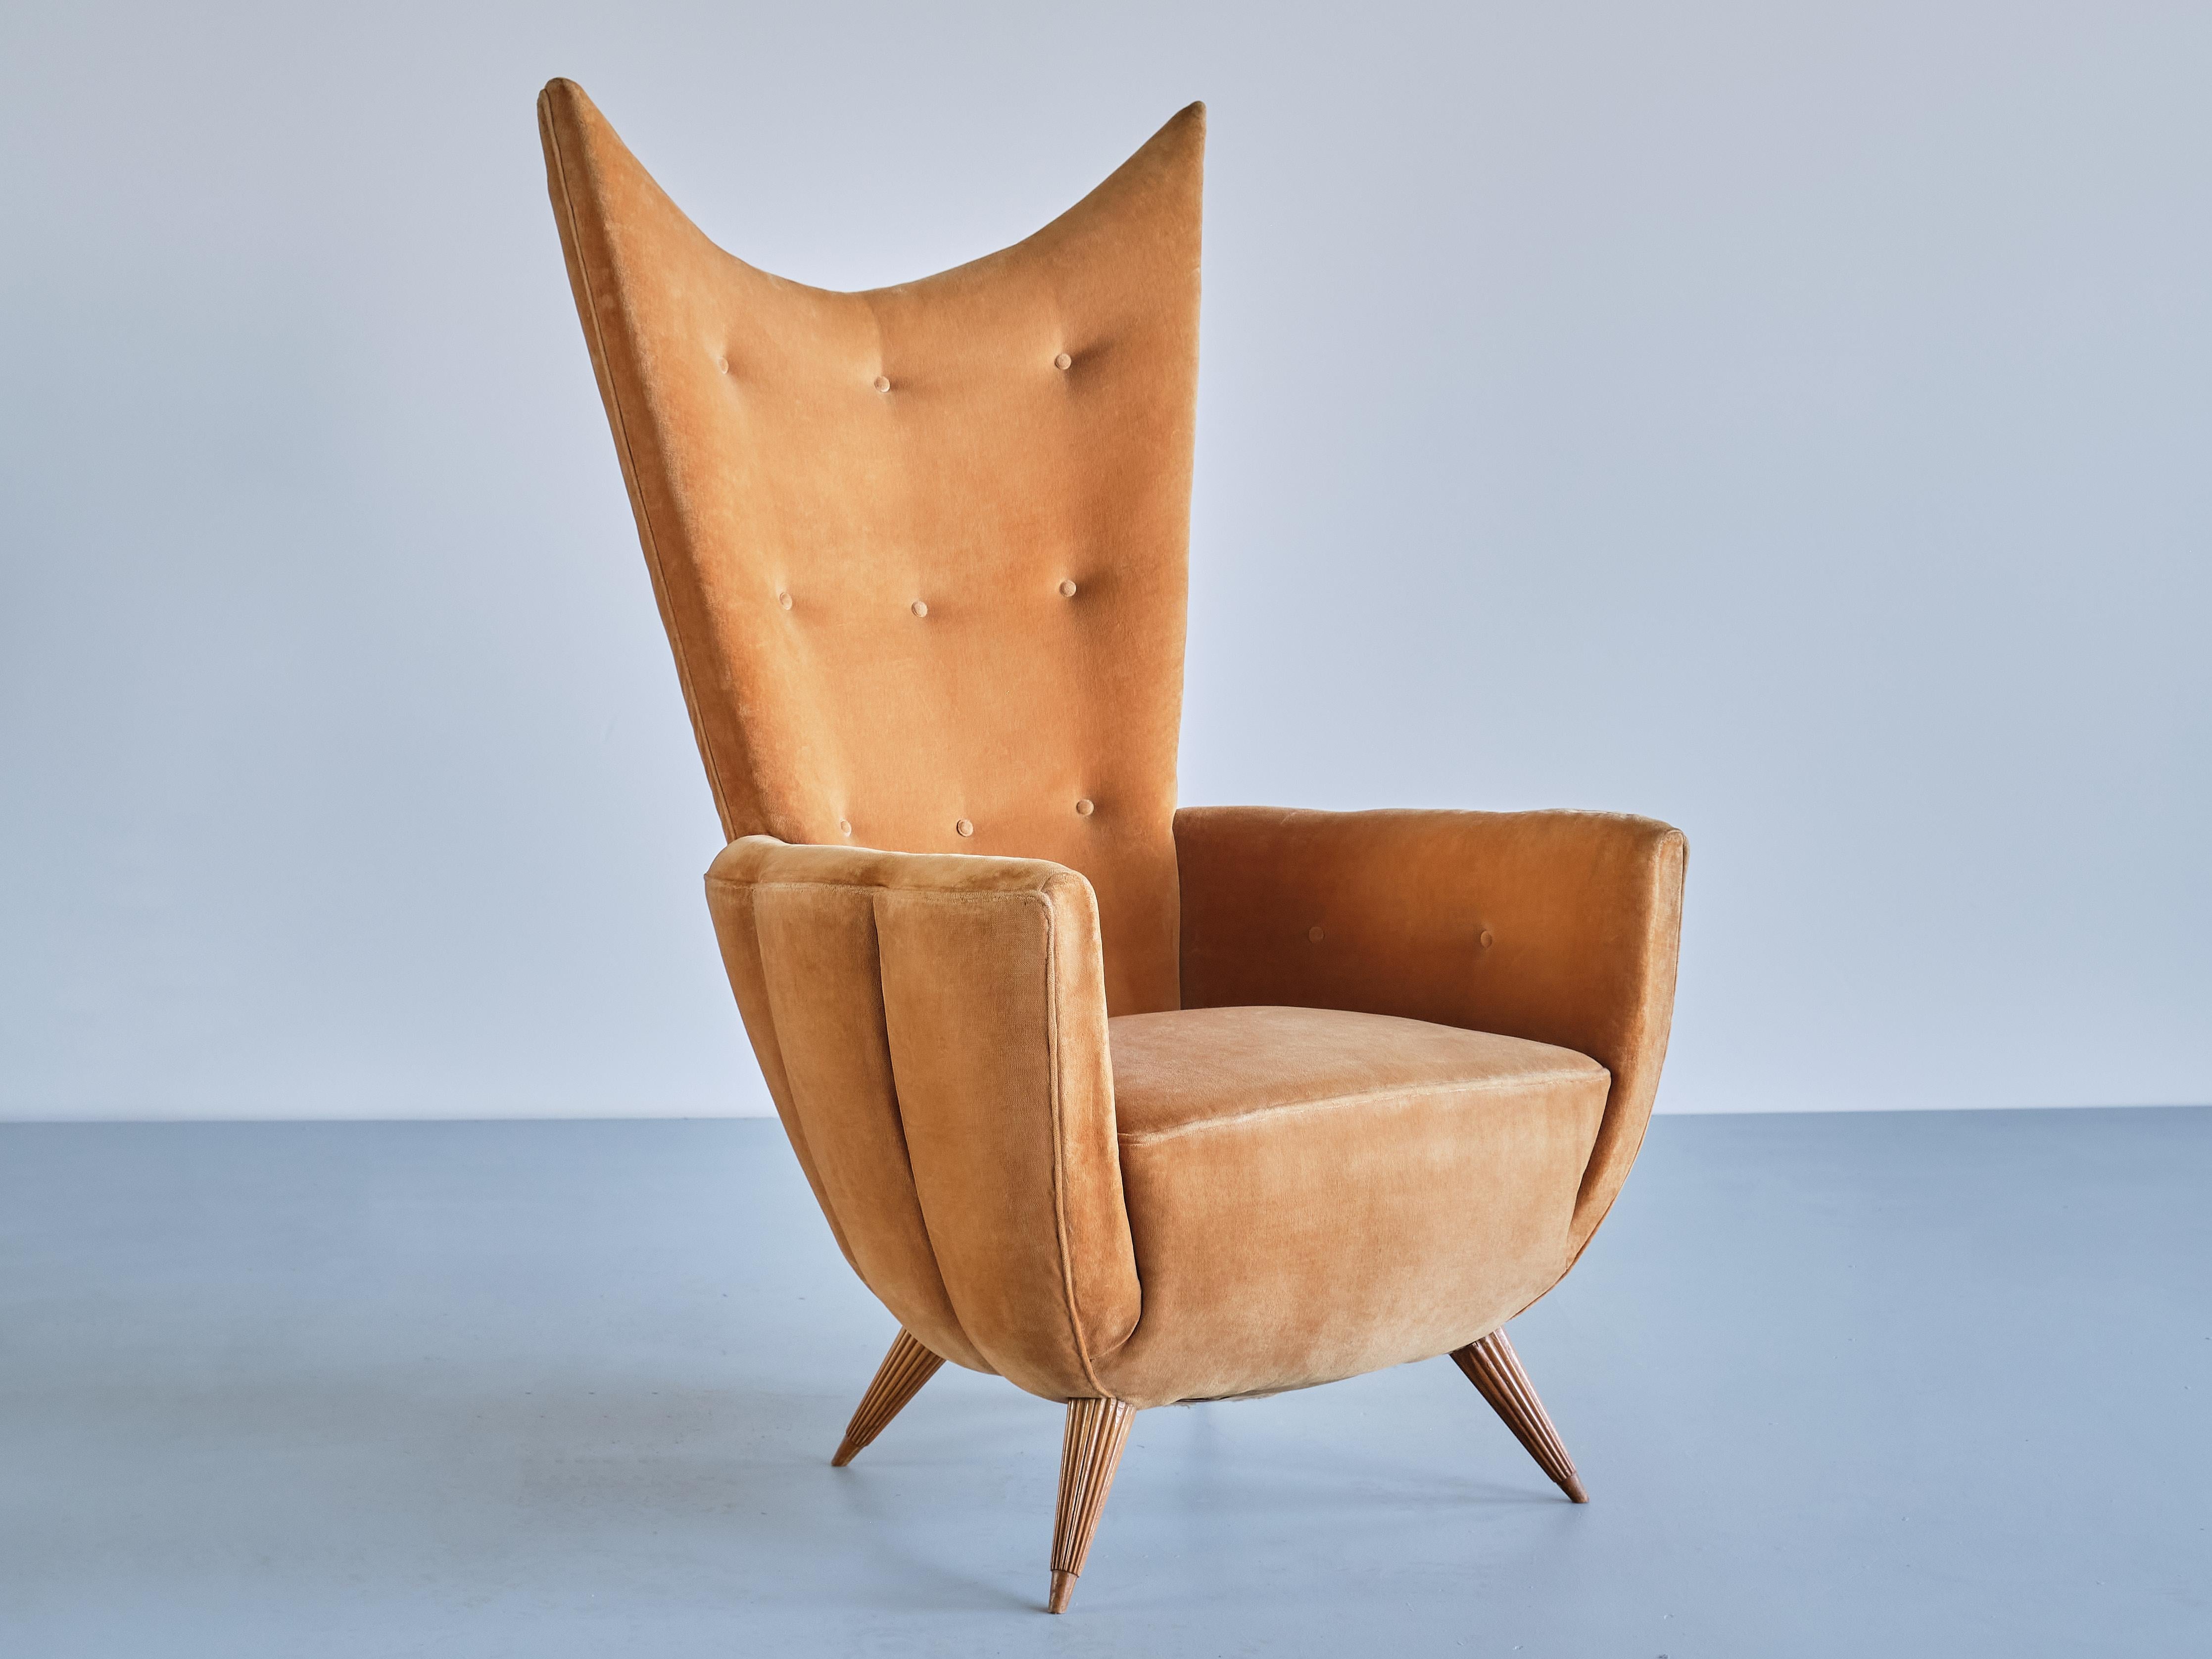 This exceptionally rare armchair was designed by Guglielmo Ulrich in the 1940s. 
The elegant design is marked by the distinct, curved lines of the winged backrest and the rounded lines of the arms and front. As with most of Ulrich's designs during